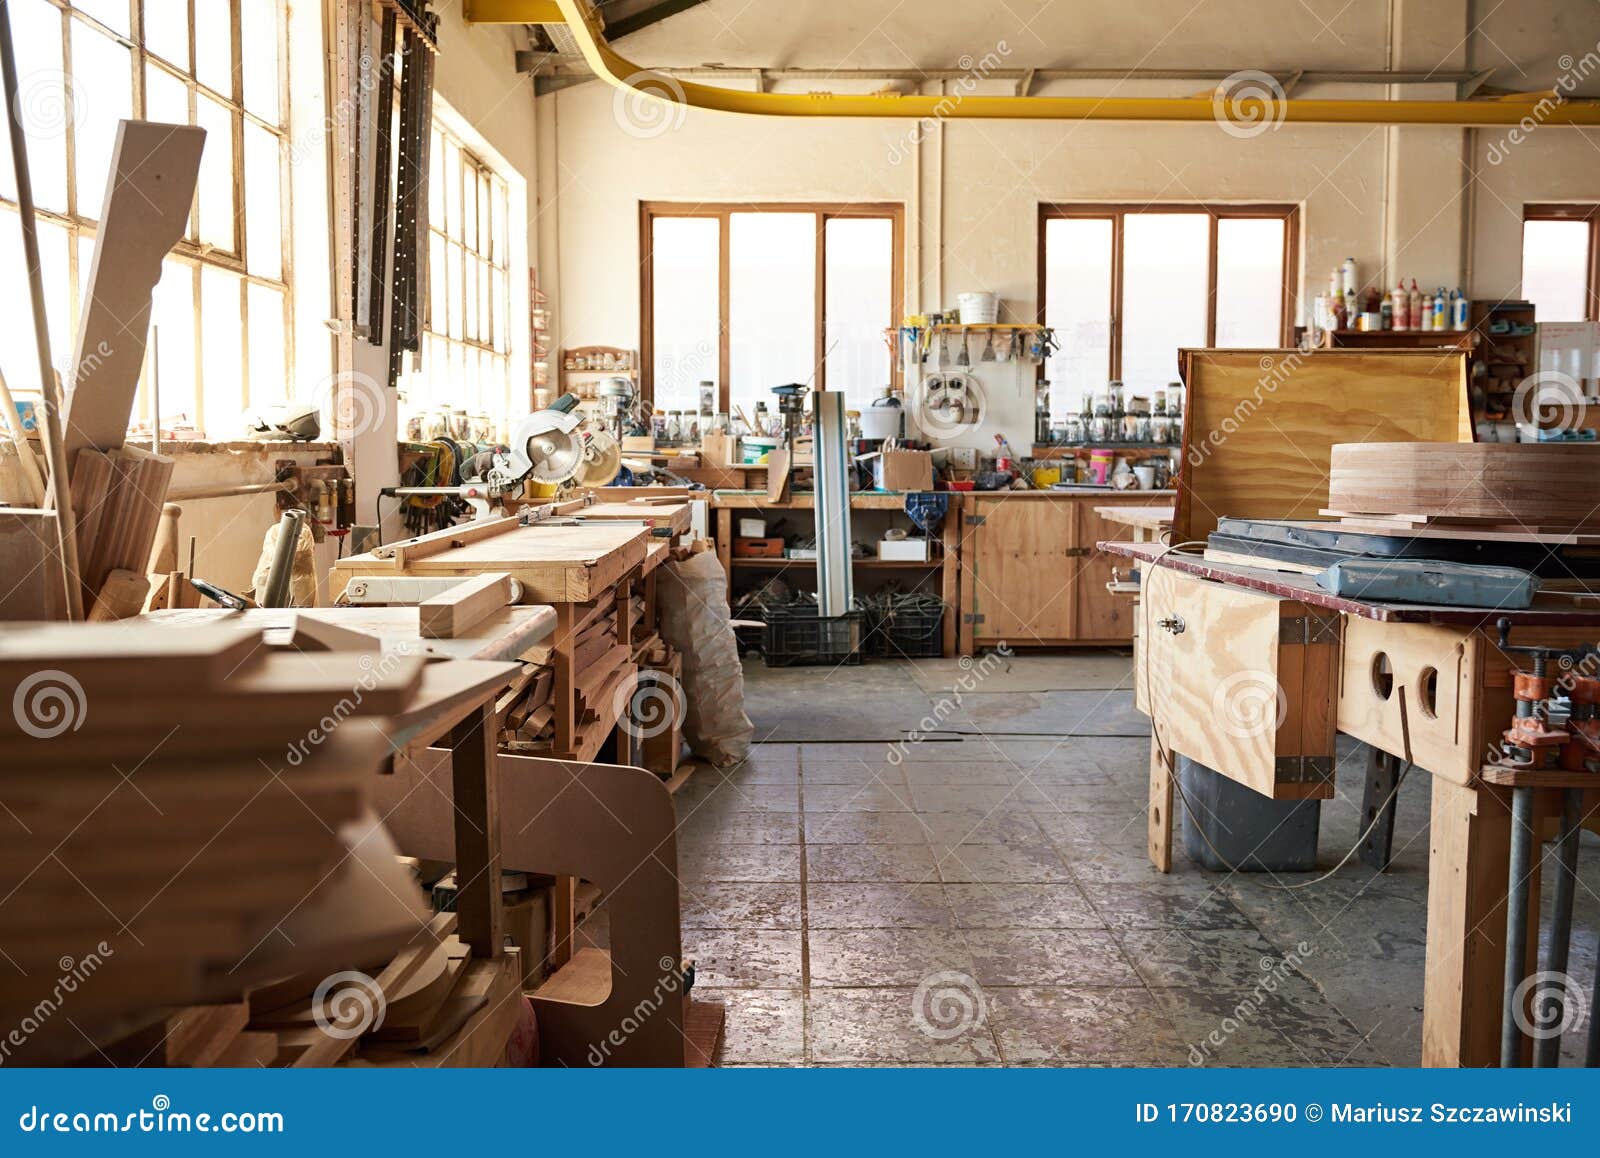 Interior Of A Large Bright Woodworking Workshop Stock Photo Image Of Large Plank 170823690